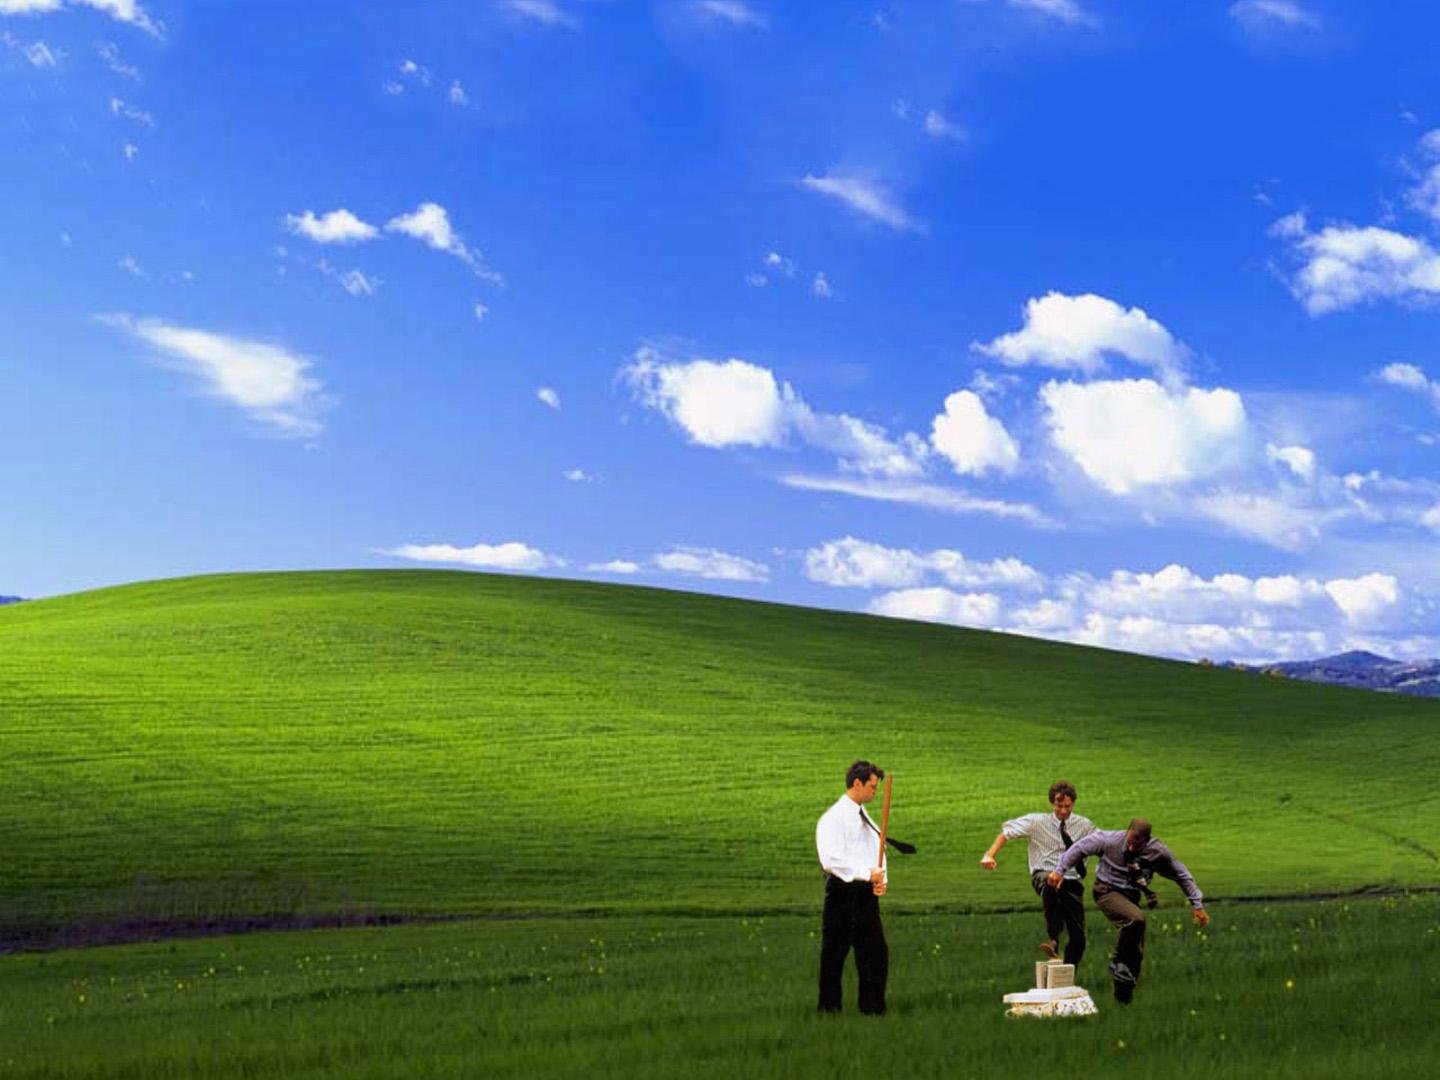 Office Space, XP Bliss style  wallpapers